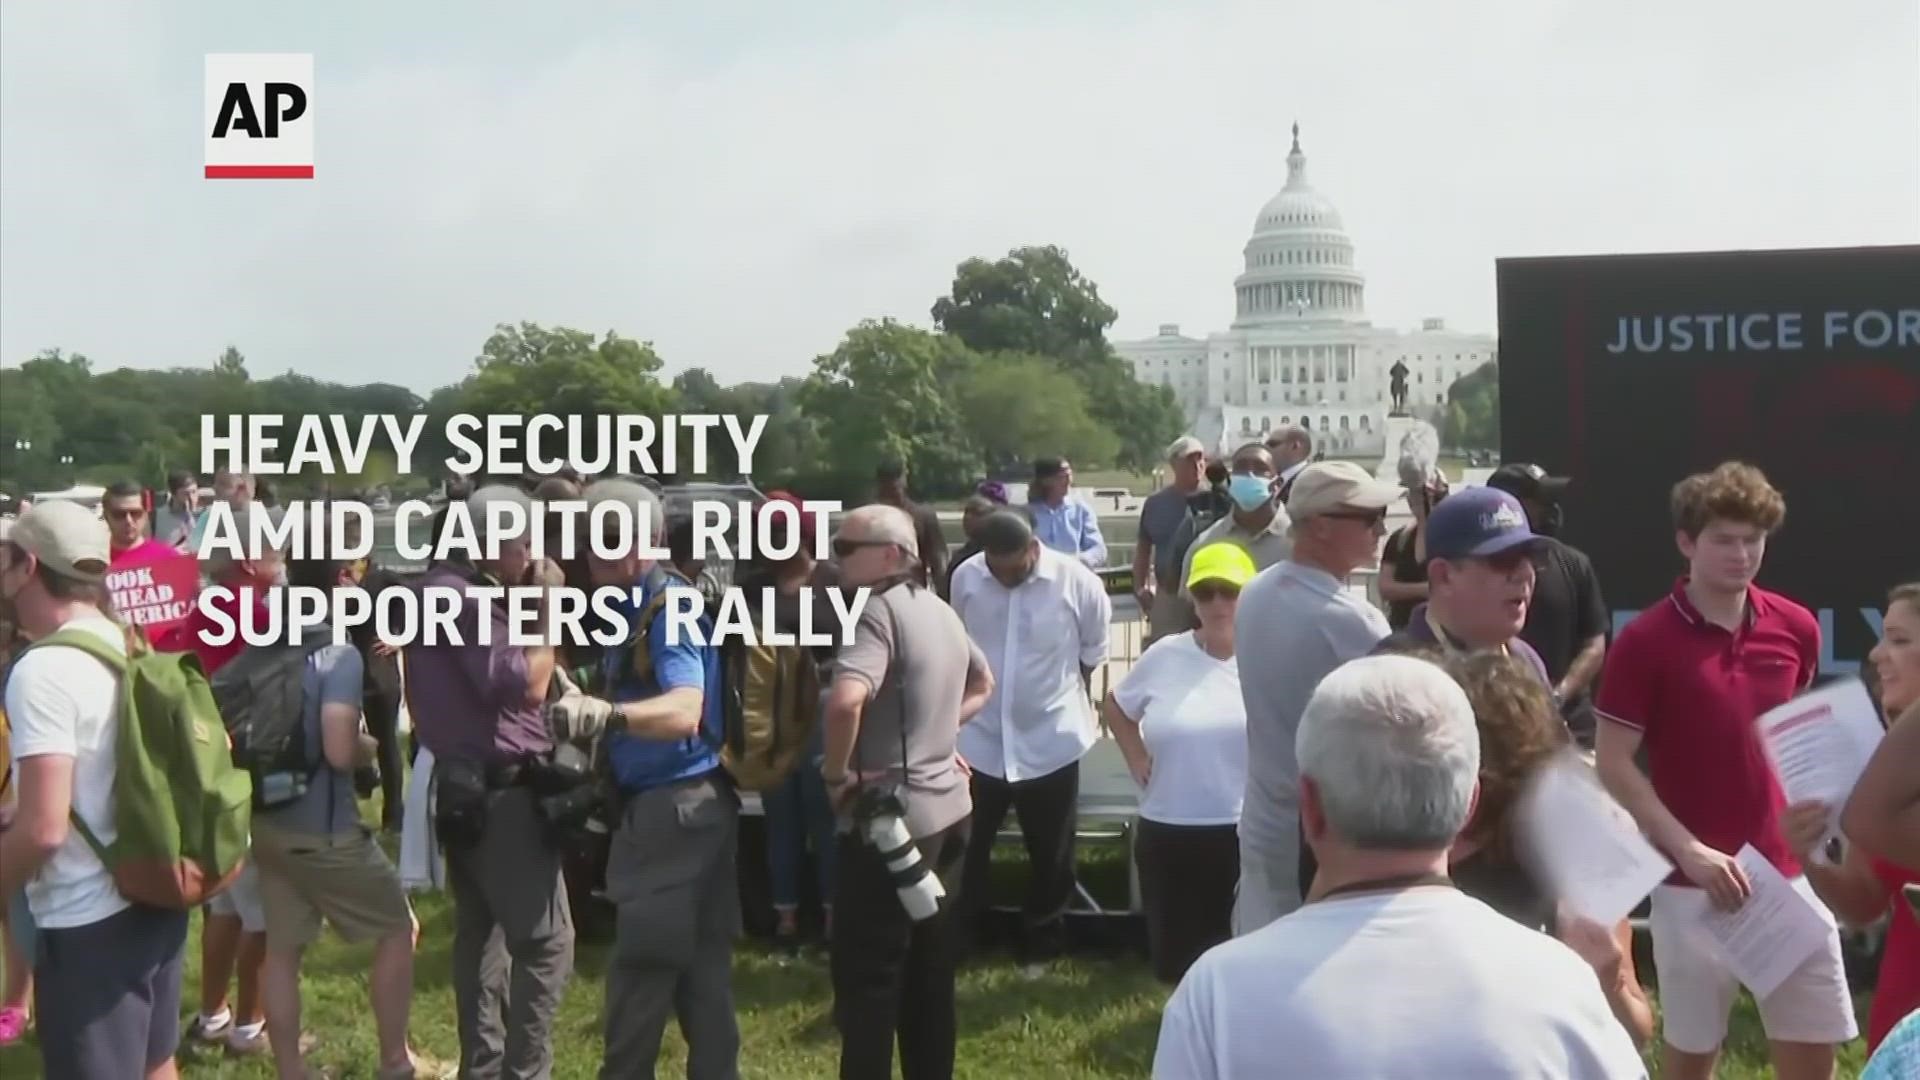 Authorities placed the area around the US Capitol under heavy security ahead of a rally on Saturday.